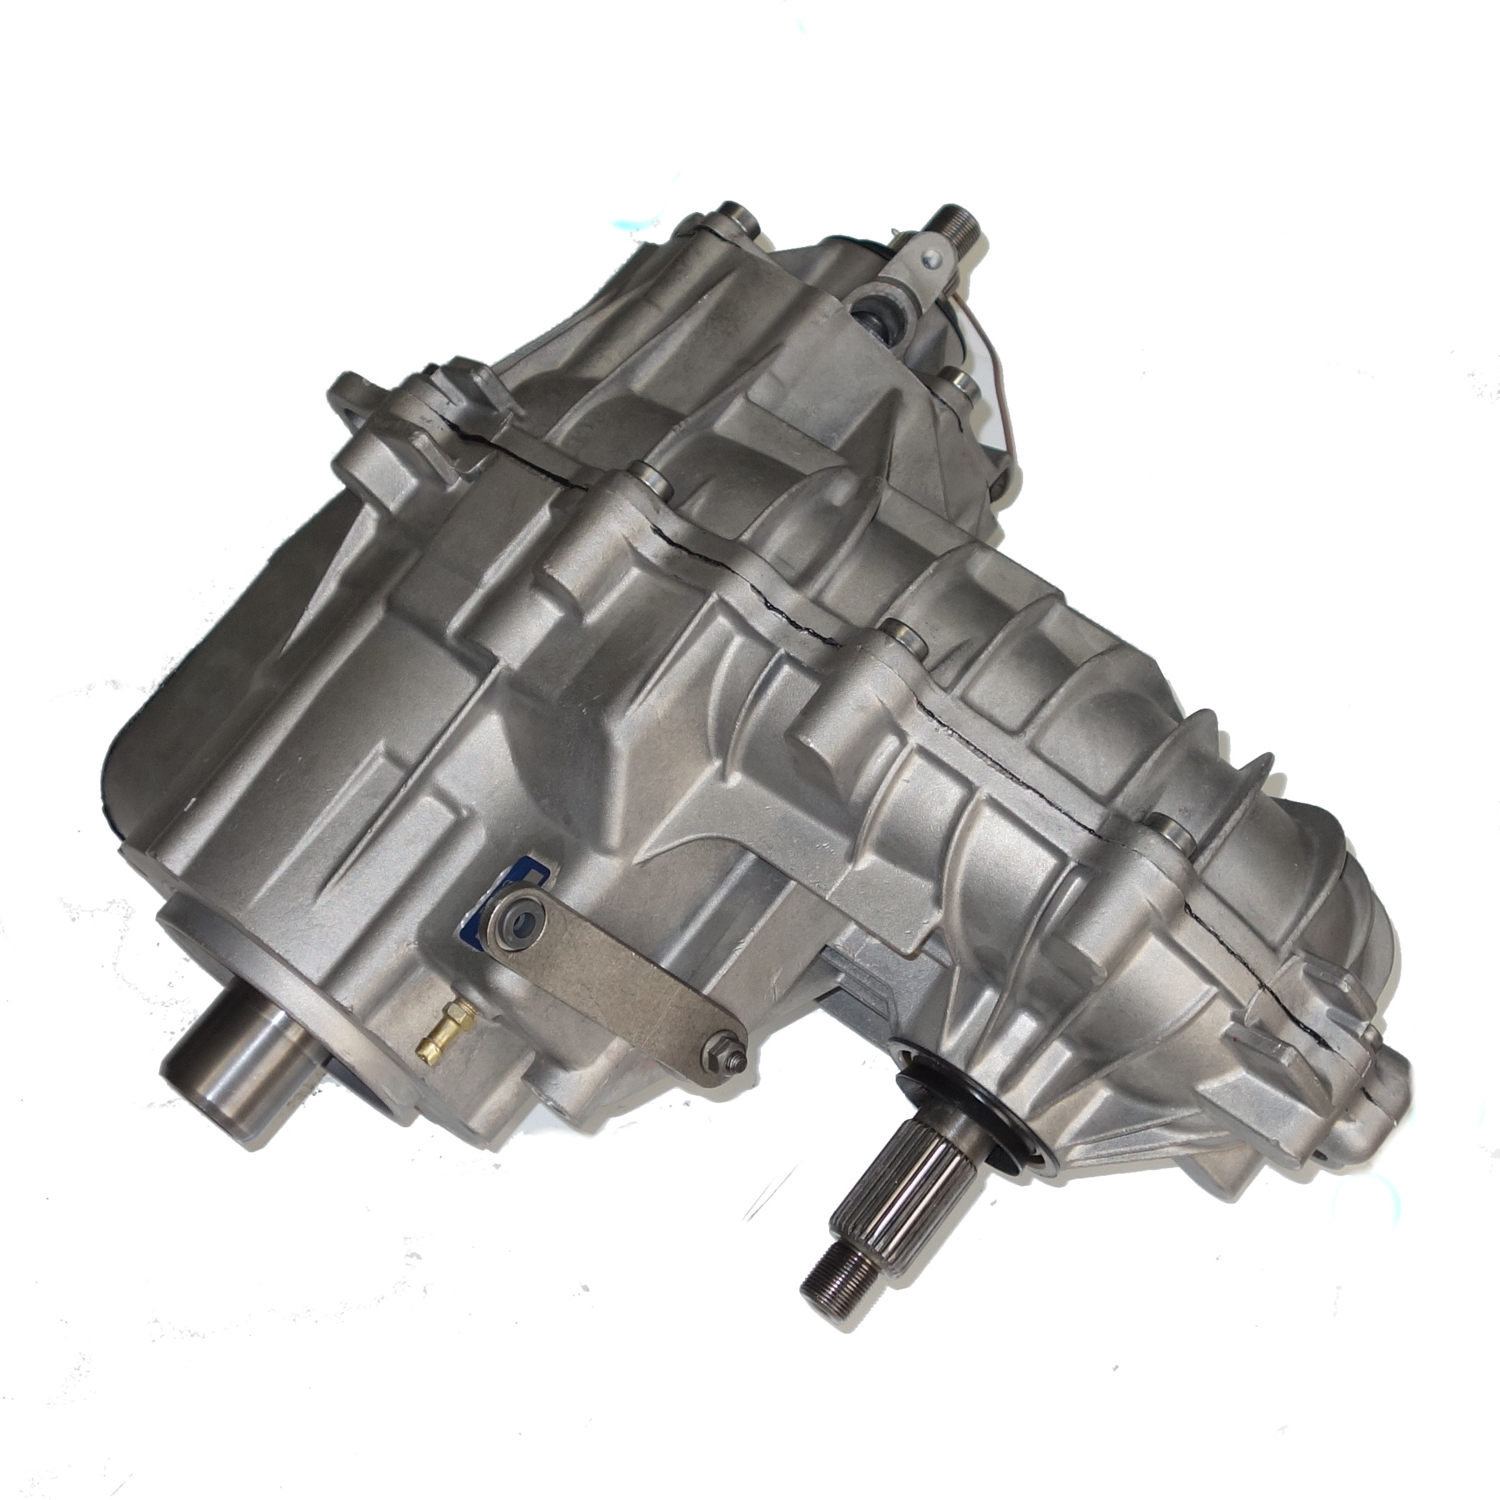 Remanufactured BW1370 & BW4401 Transfer Case for GM 89-93 K3500